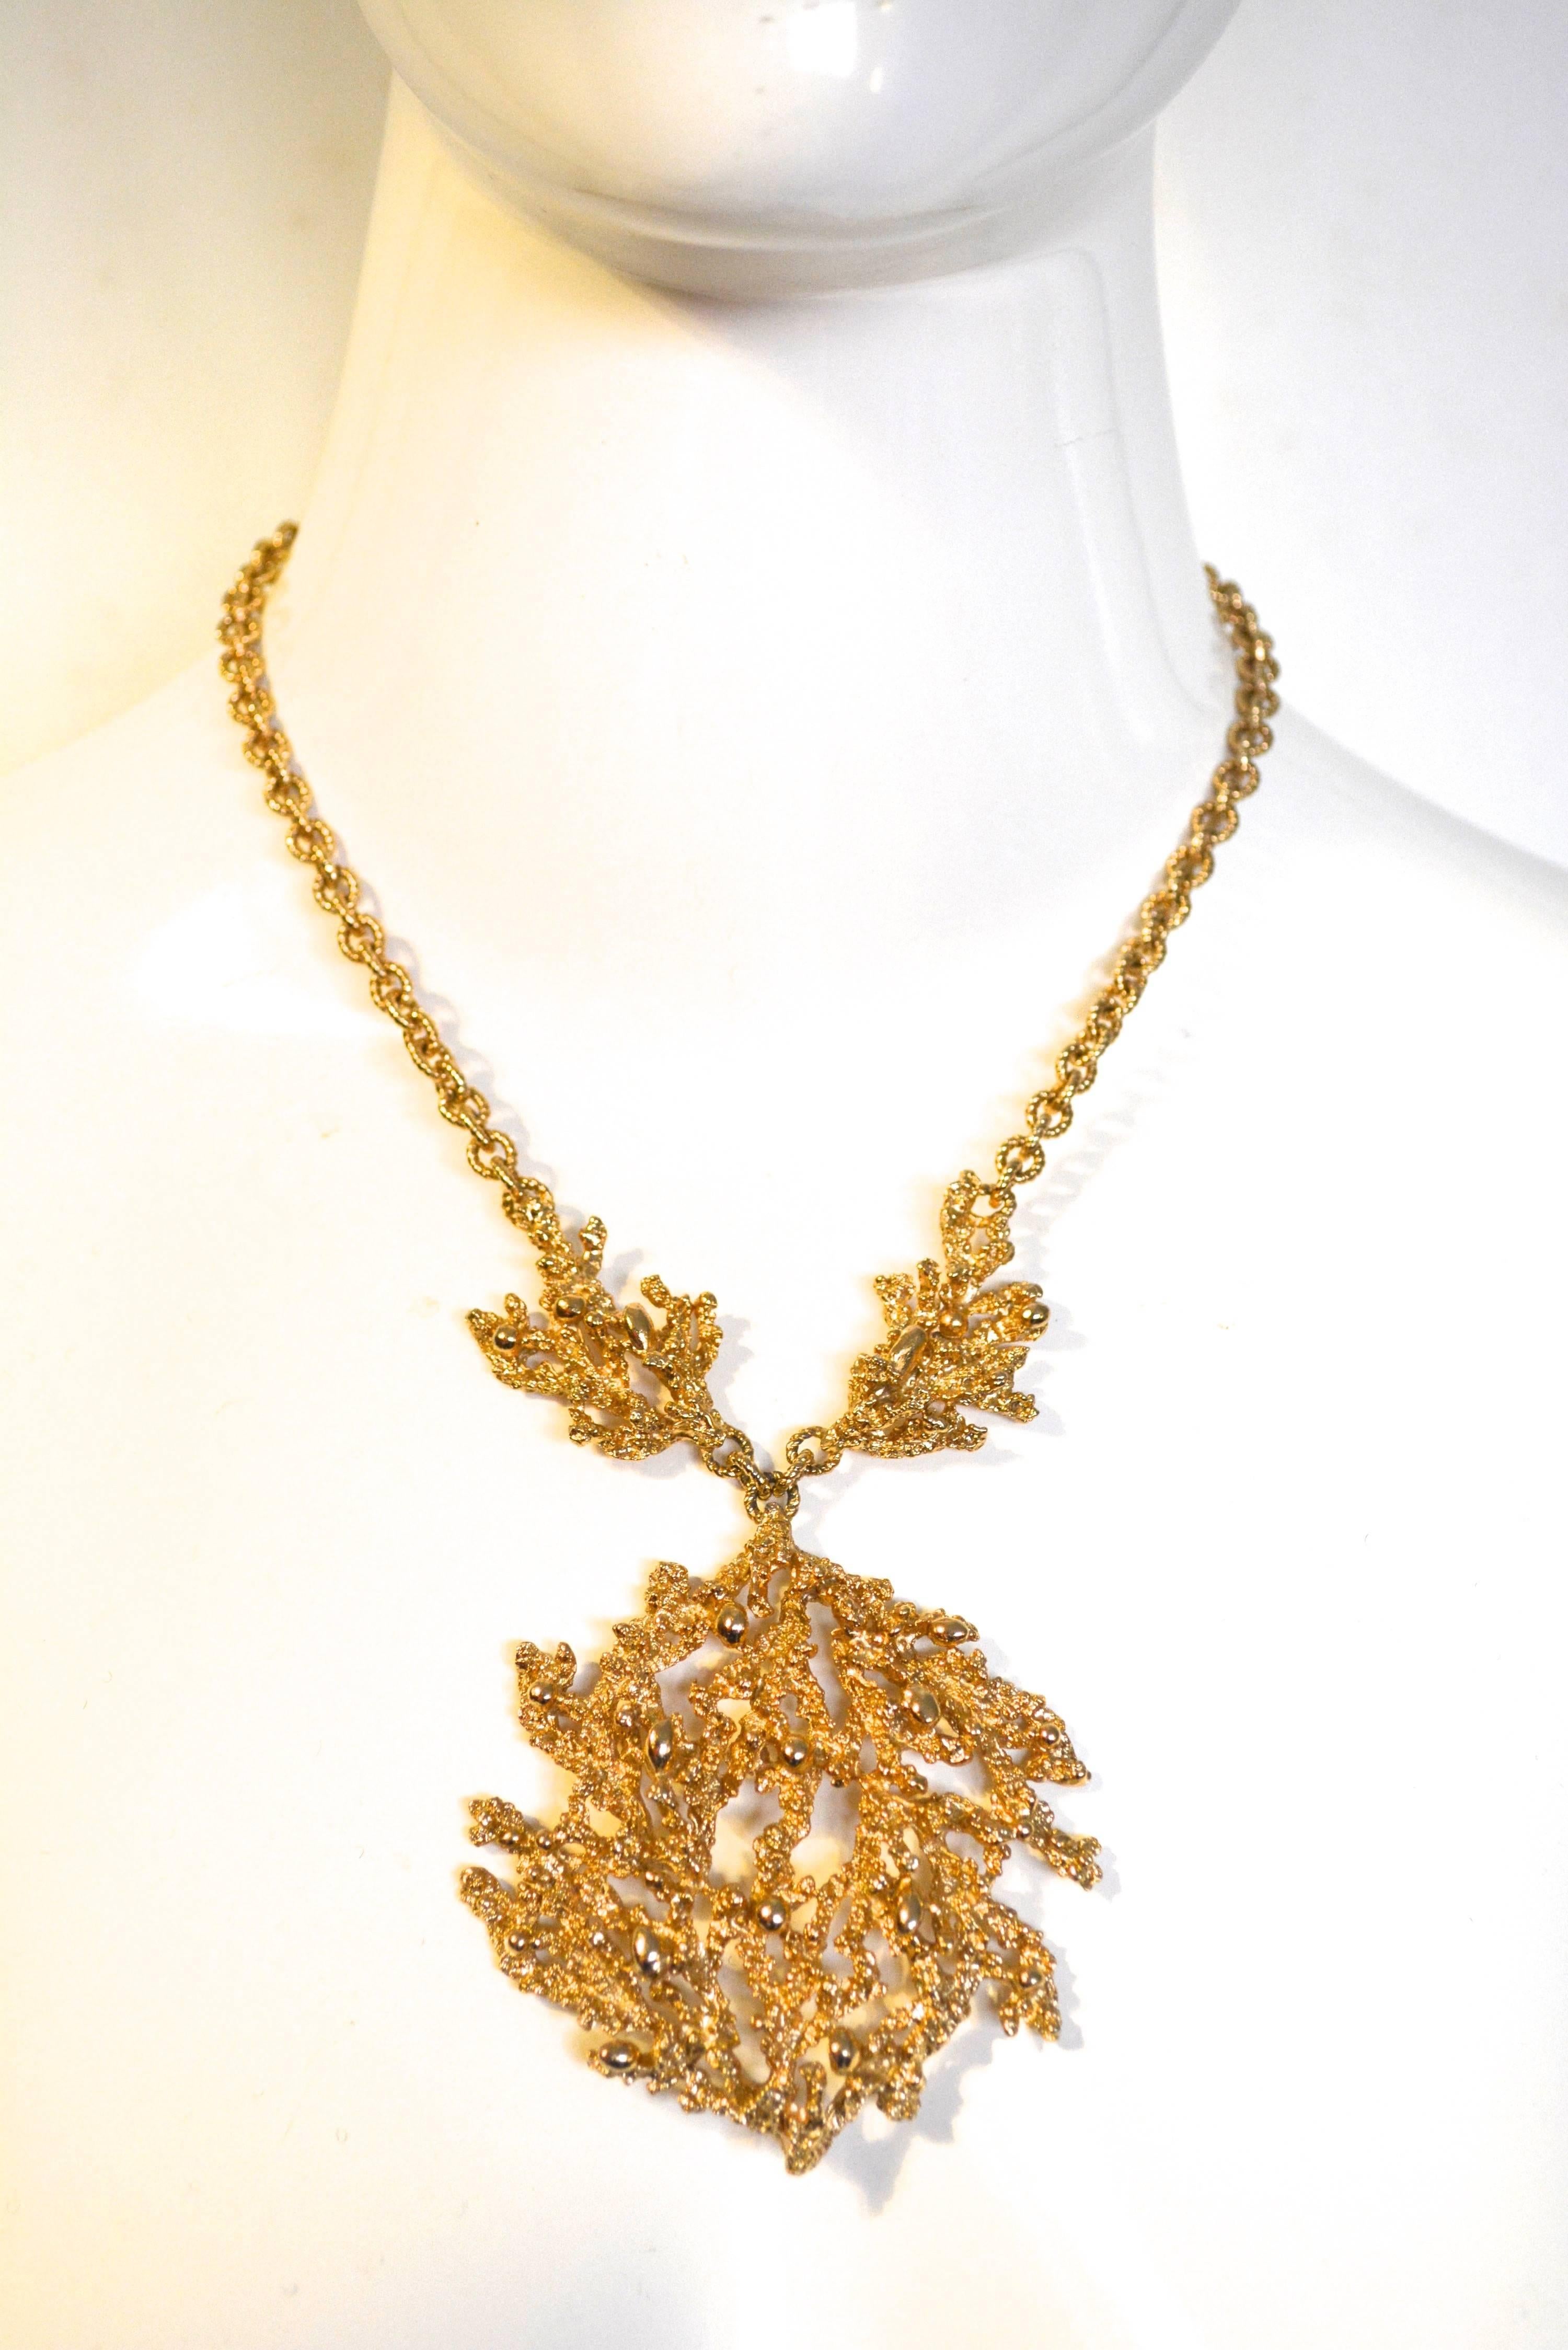 Napier Brutalist Nugget Necklace by Eugene Bertolli In Excellent Condition For Sale In Litchfield County, CT